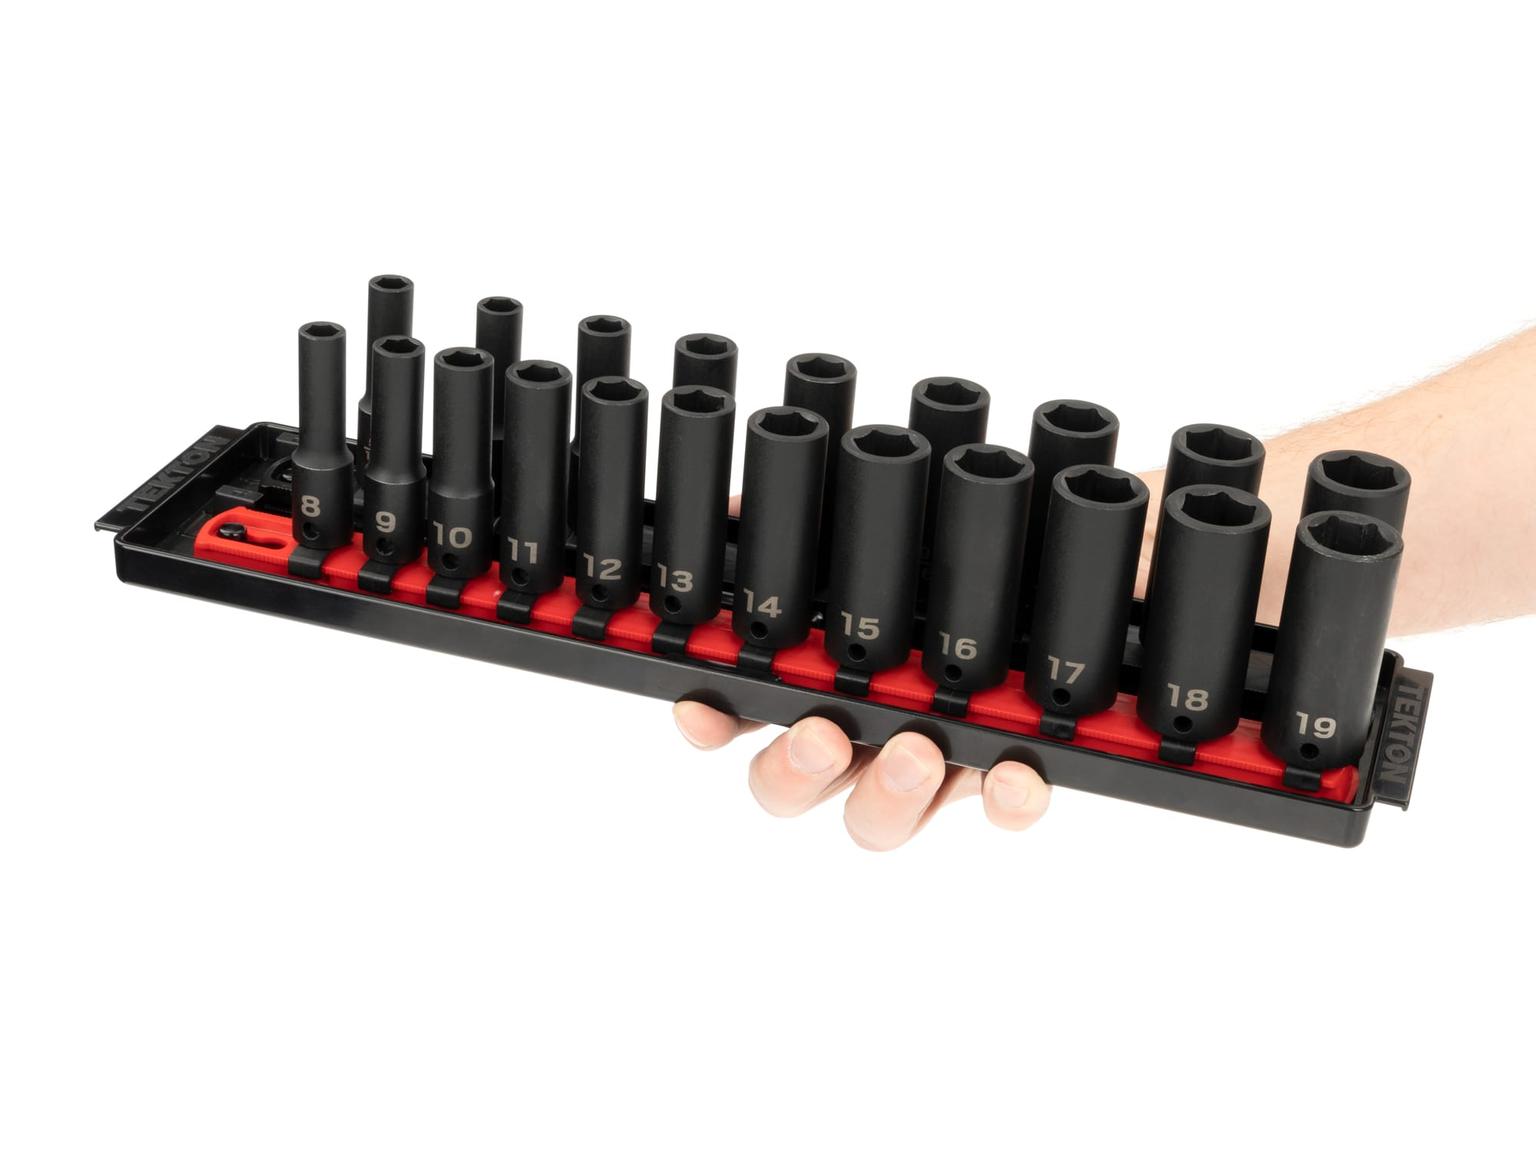 TEKTON SID91201-T 3/8 Inch Drive Deep 6-Point Impact Socket Set, 21-Piece (5/16-3/4 in., 8-19 mm) with Rails